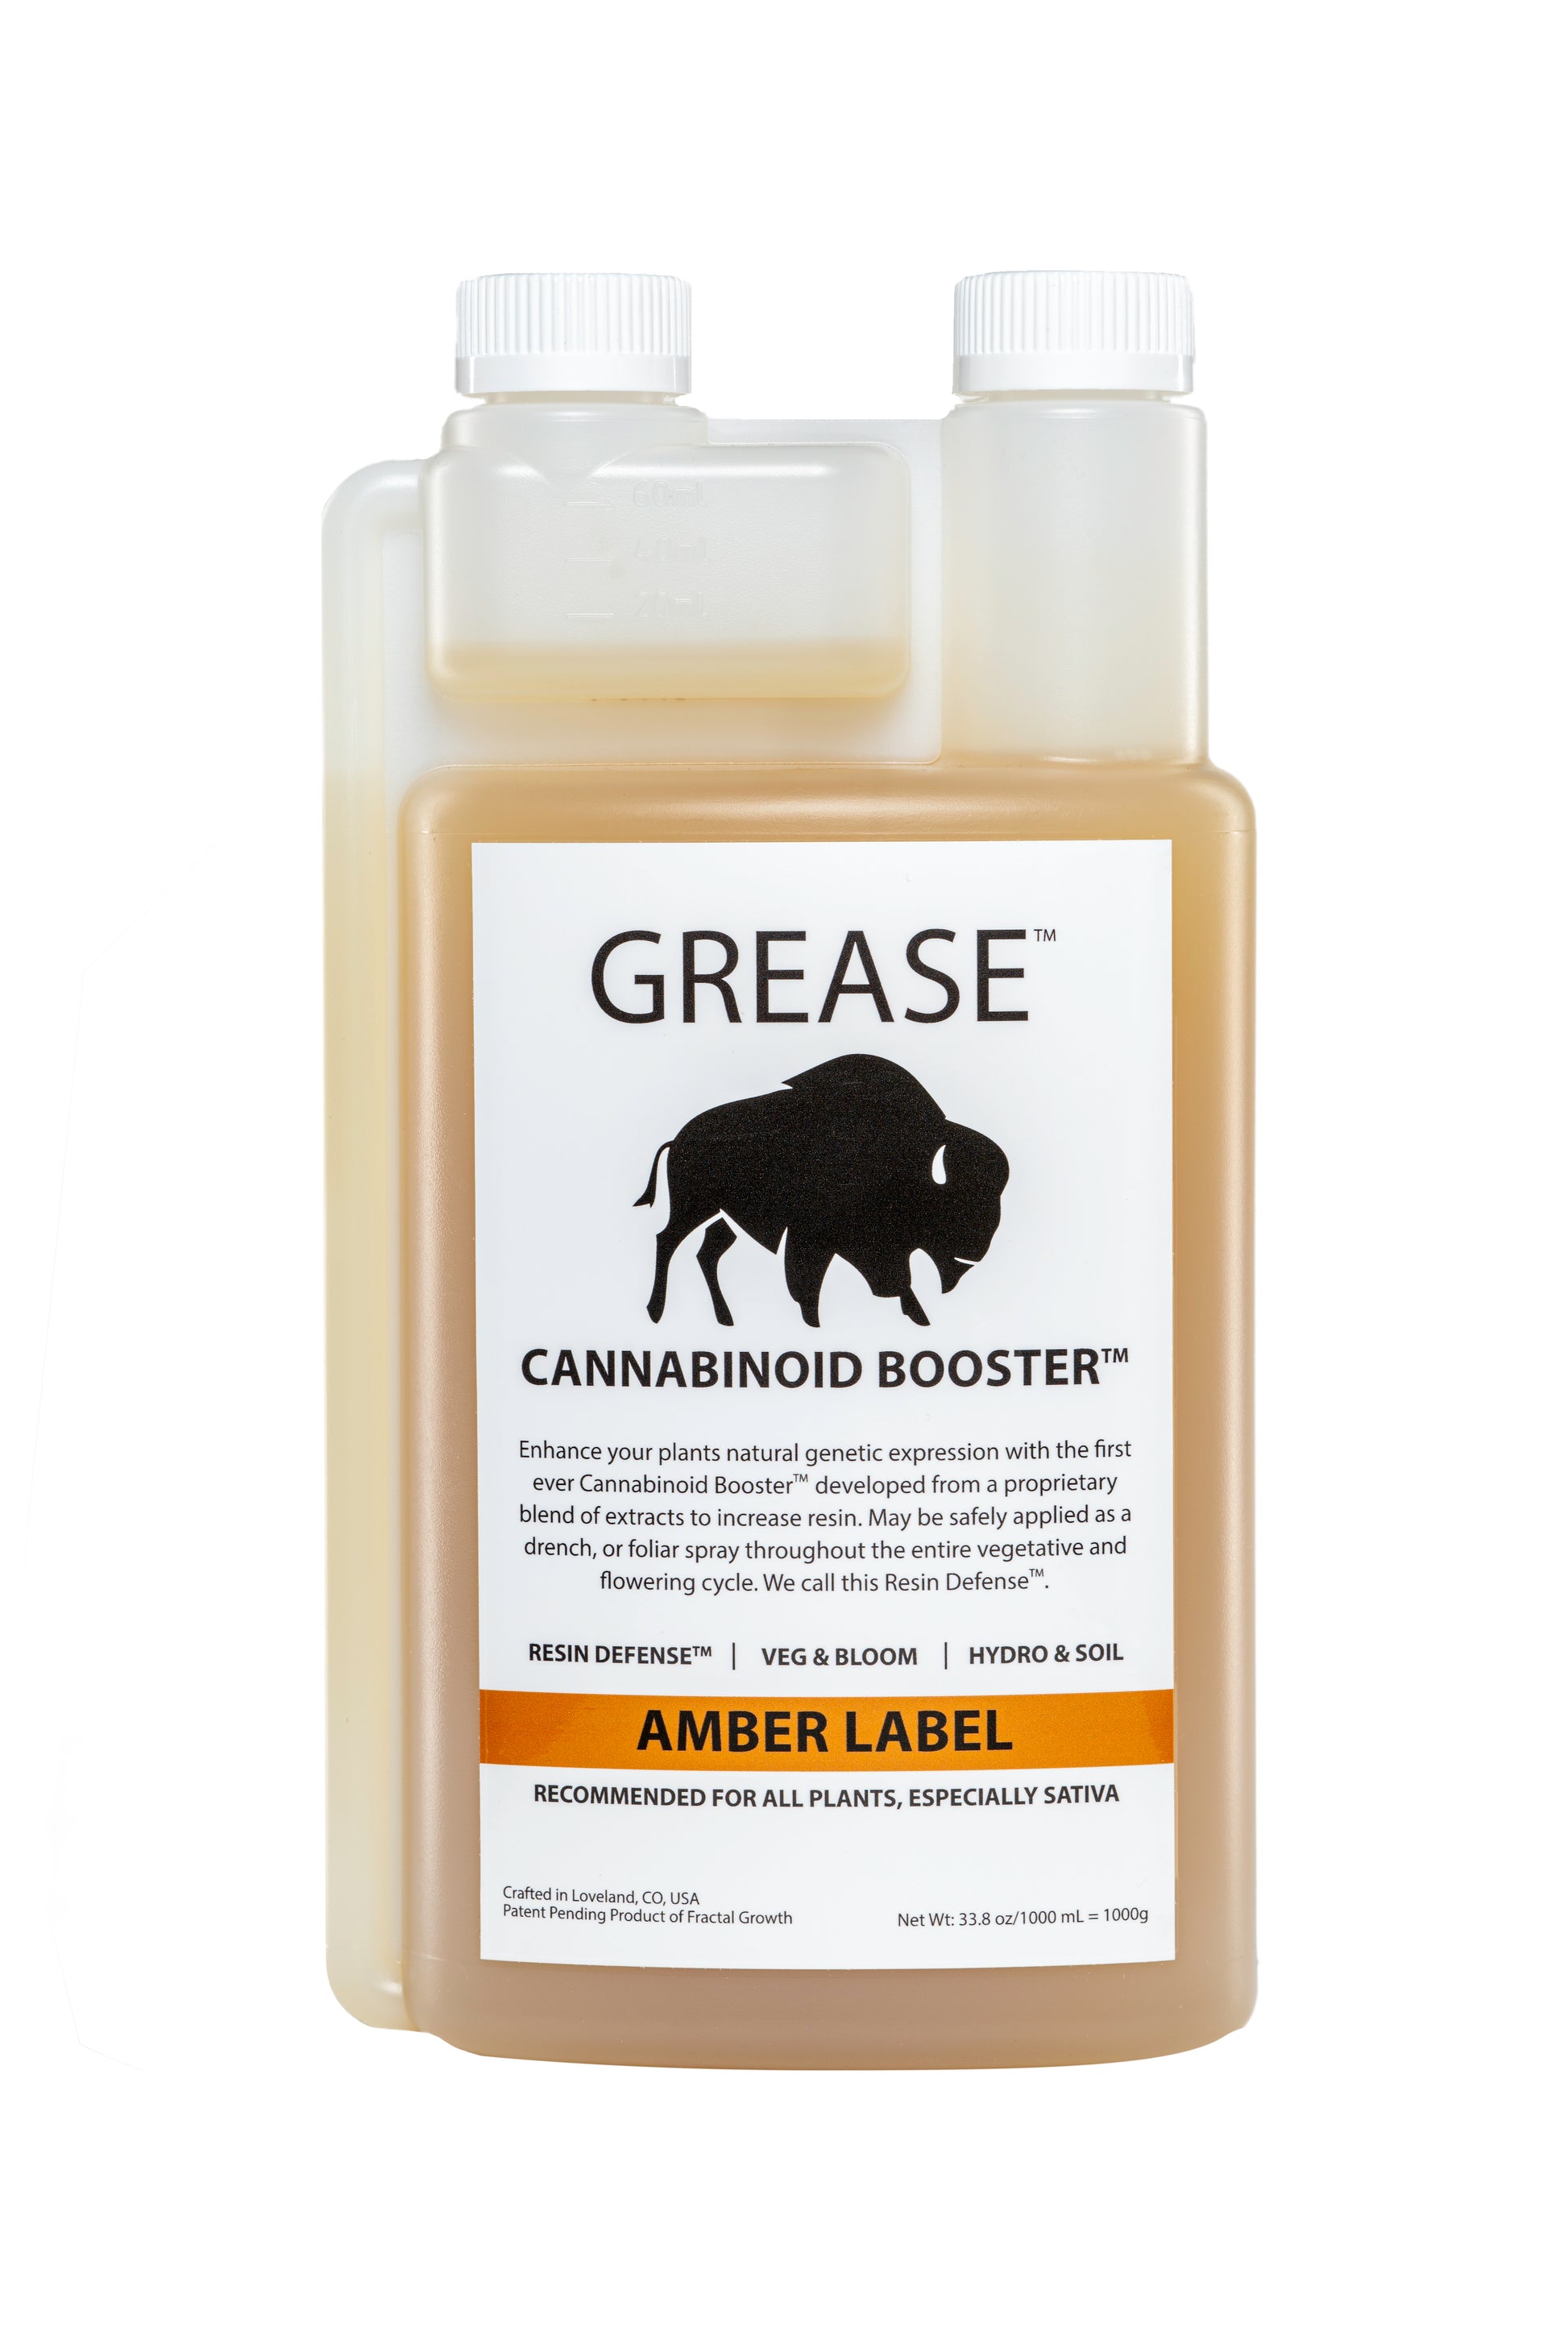 Grease Amber Label, Grease Nutrients